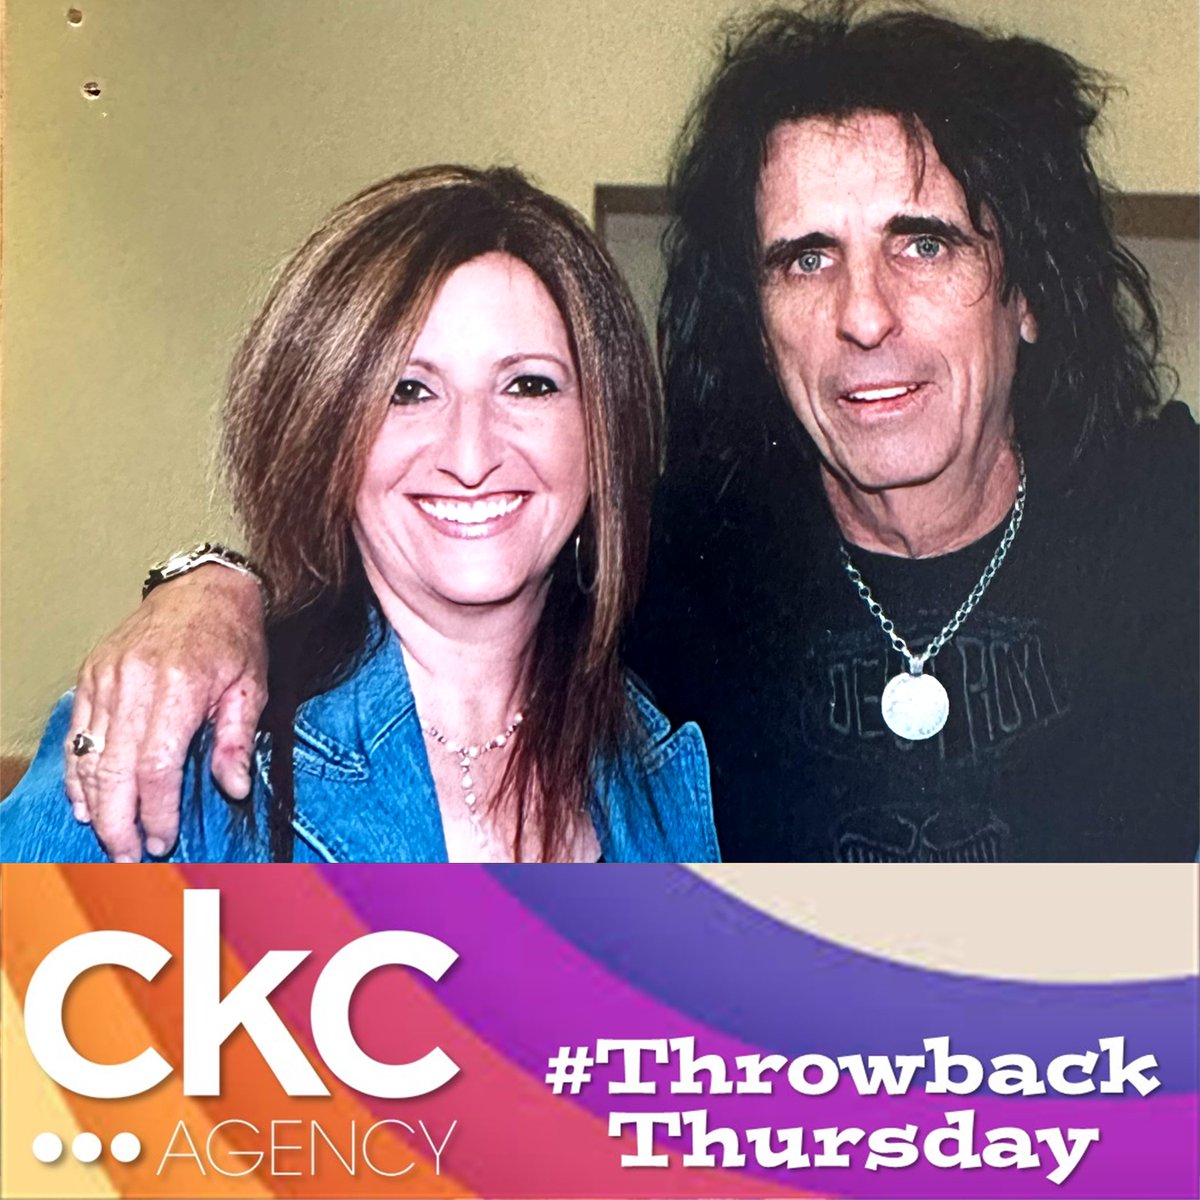 #ThrowbackThursday Great pic from the #CKCAgency archives! Alice Cooper (contrary to his song title) is totally “Mr. Nice Guy!”